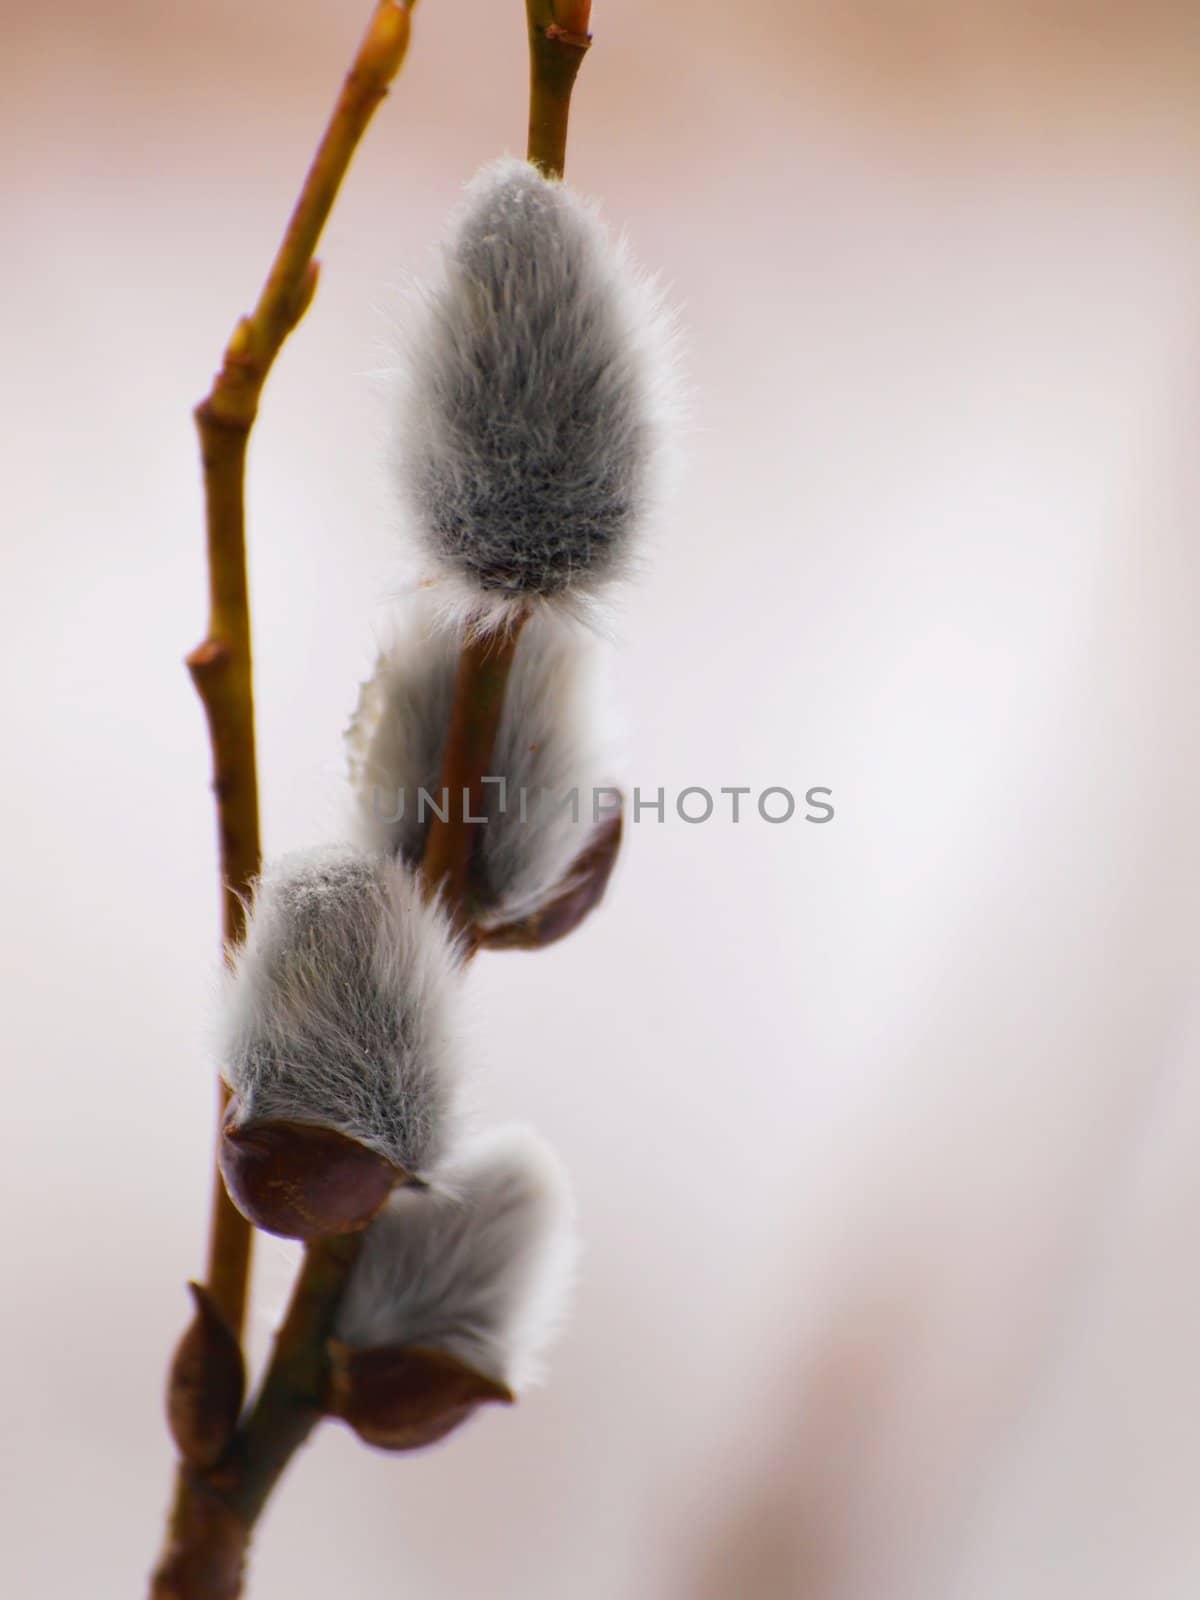 4 catkin of pussy willows